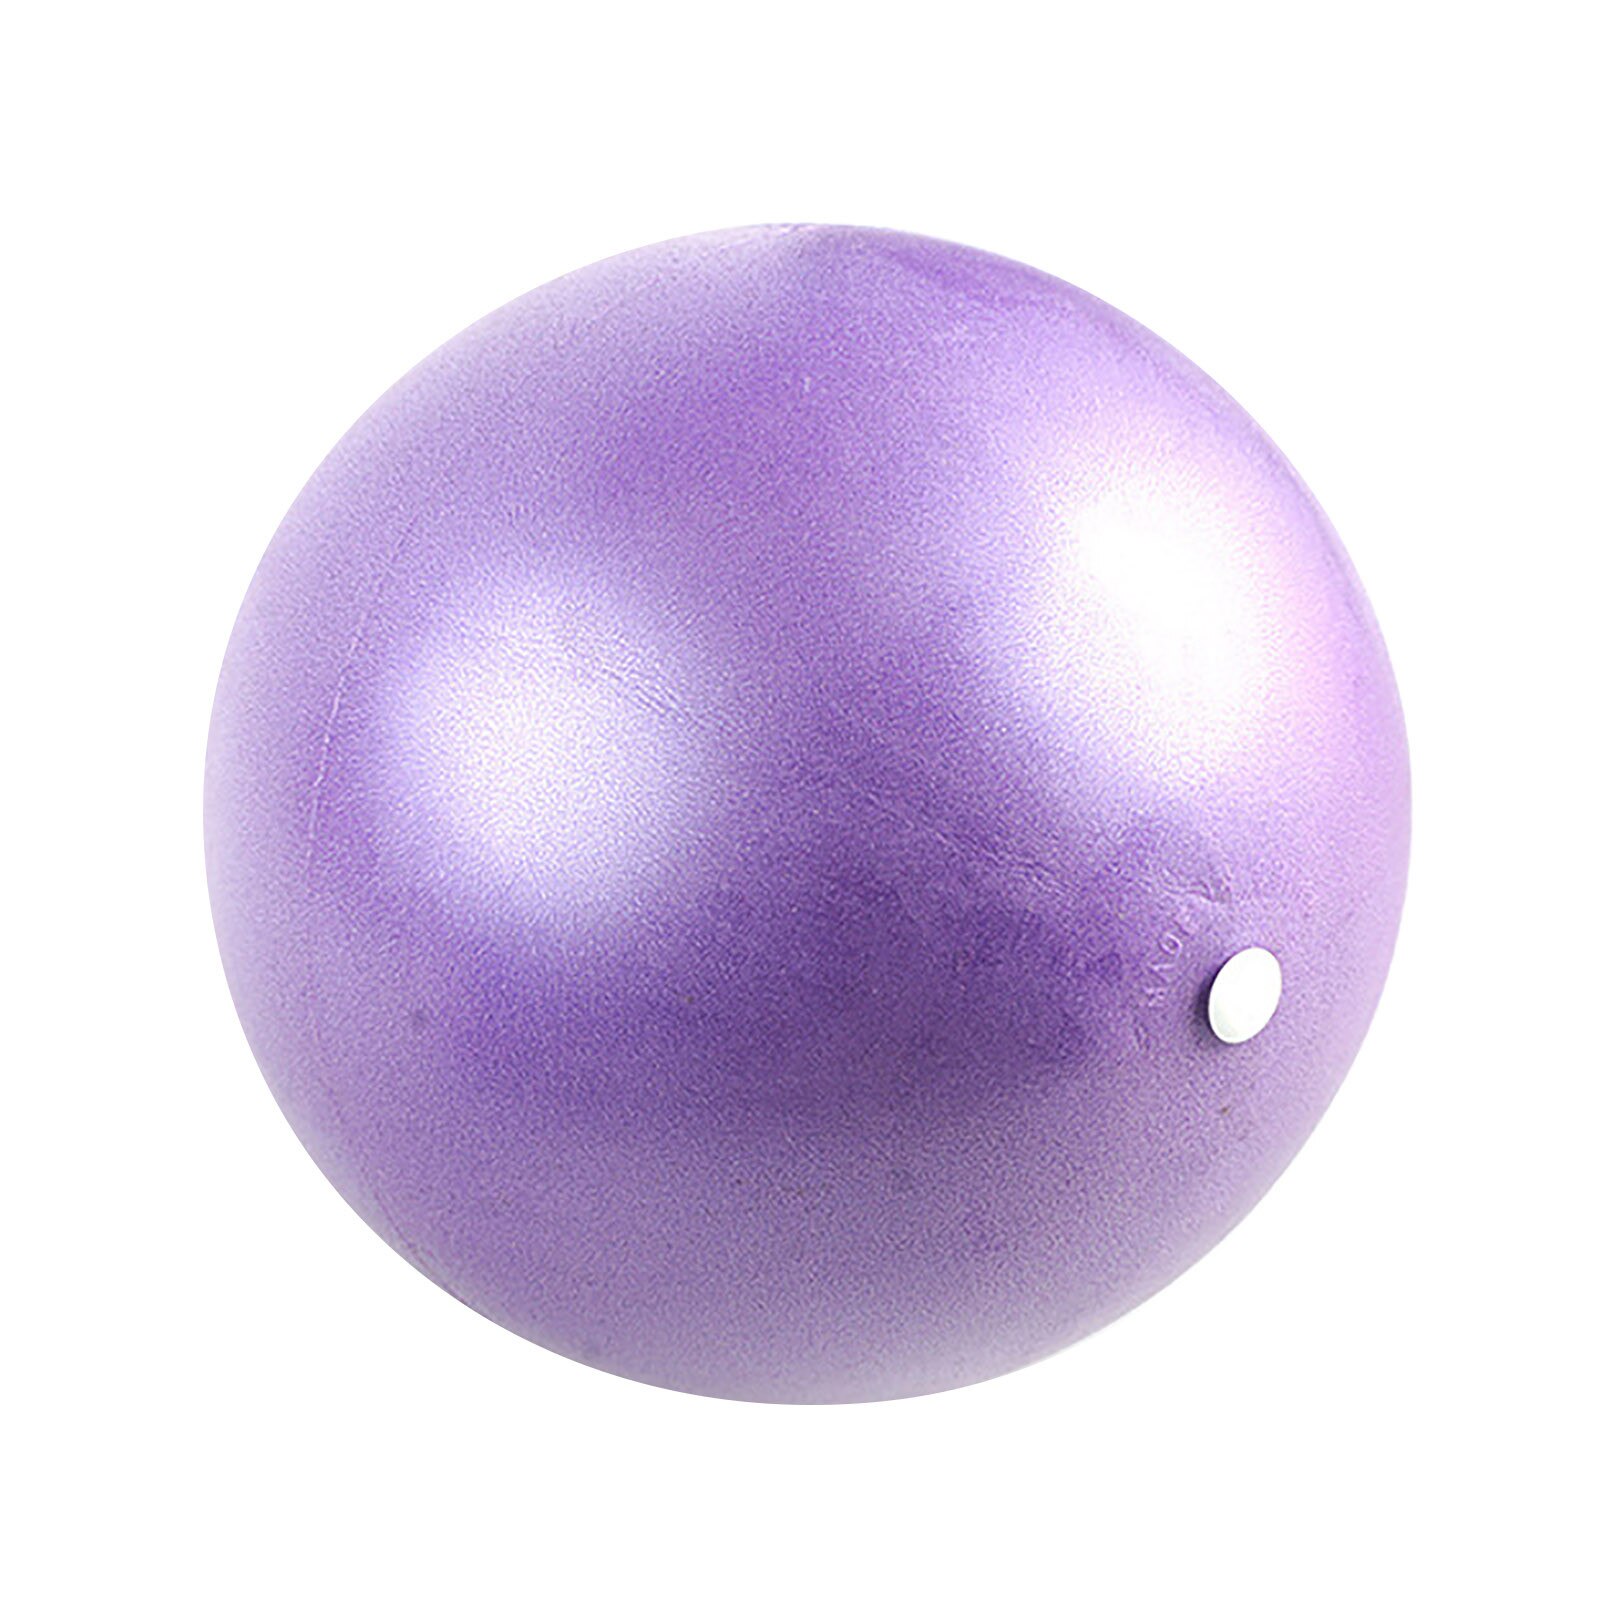 Yoga Bal Fitness Voor Fitness Pilates Oefening Stabiliteit Balance Ball 15Cm Jan 13rd: Paars